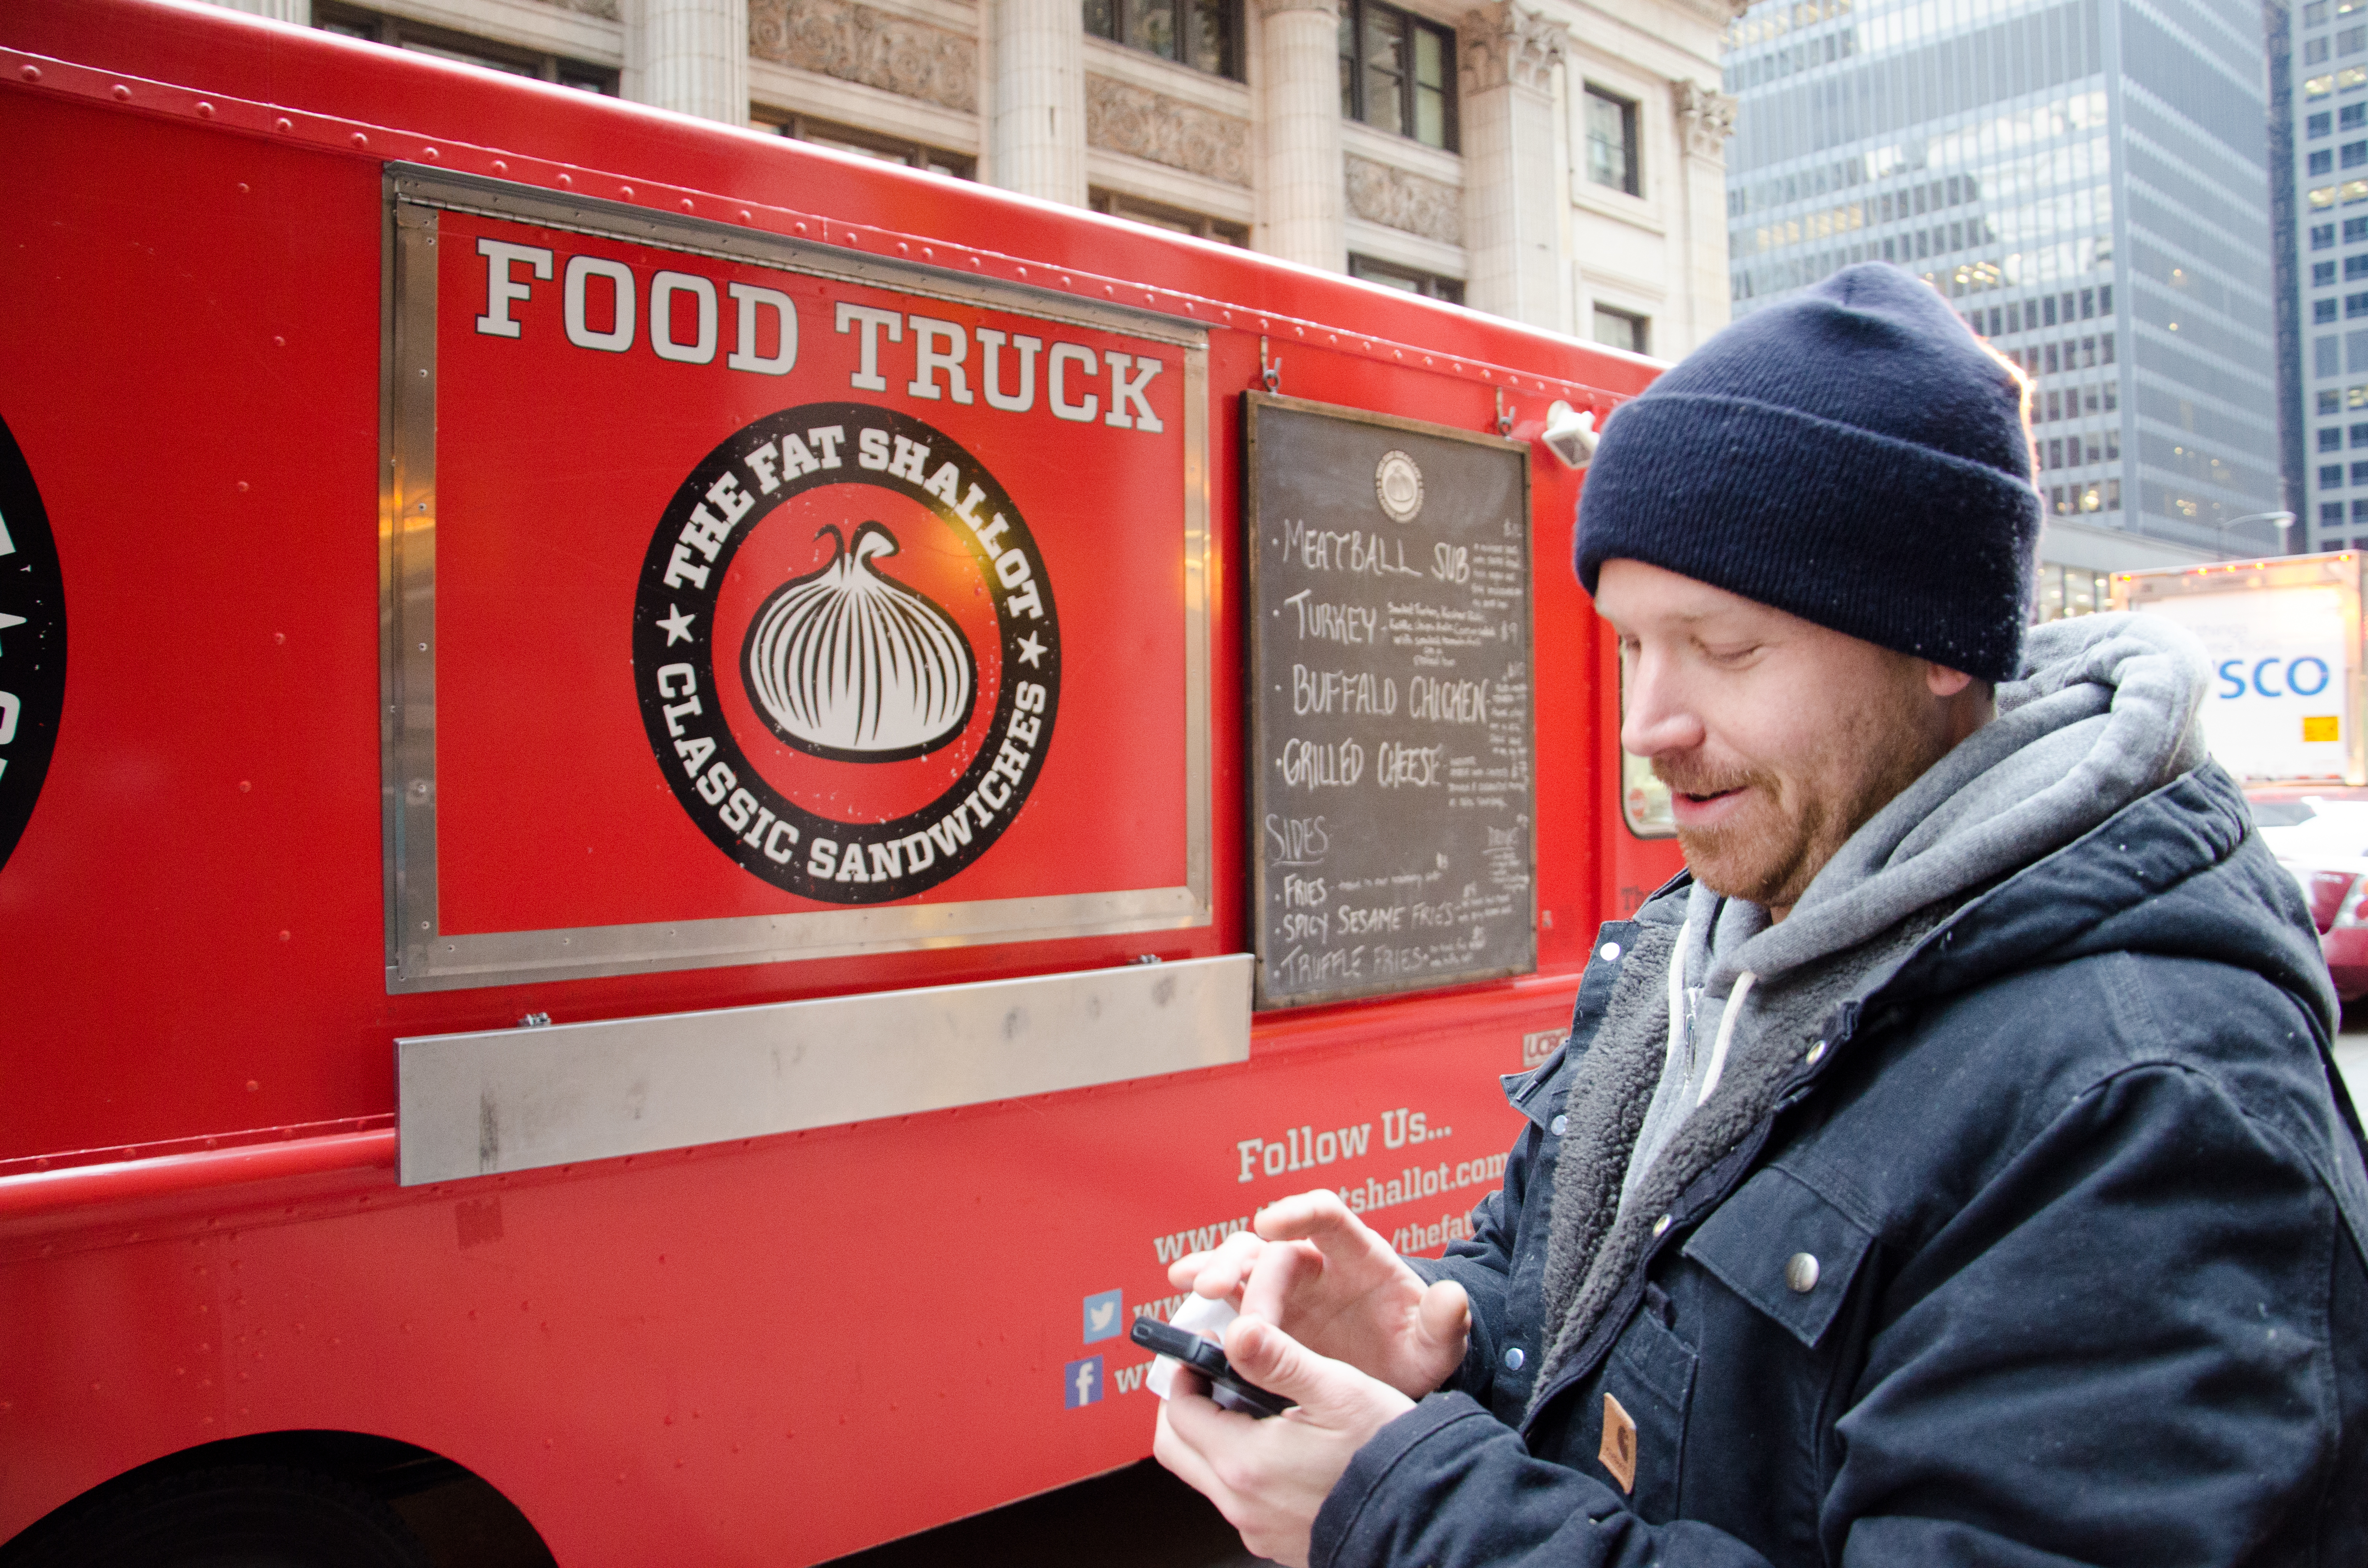 Sam Barron, one of the owners of the Fat Shallot, a food truck in Chicago, tweets about the location of his food truck Friday, Nov. 14, 2014, so that customers could find it during the lunch time. He runs the food truck with his wife Sarah. Because of the restrictive food truck regulations in Chicago, food trucks could not park within 200 feet of a restaurant including Starbucks and 7-11, so there are not many parking spots for food trucks inside the Loop. This spot near 215 S. Clark St. is one of the best spots in the city of Chicago. Barron arrived here around 6:30 a.m. to get a spot.